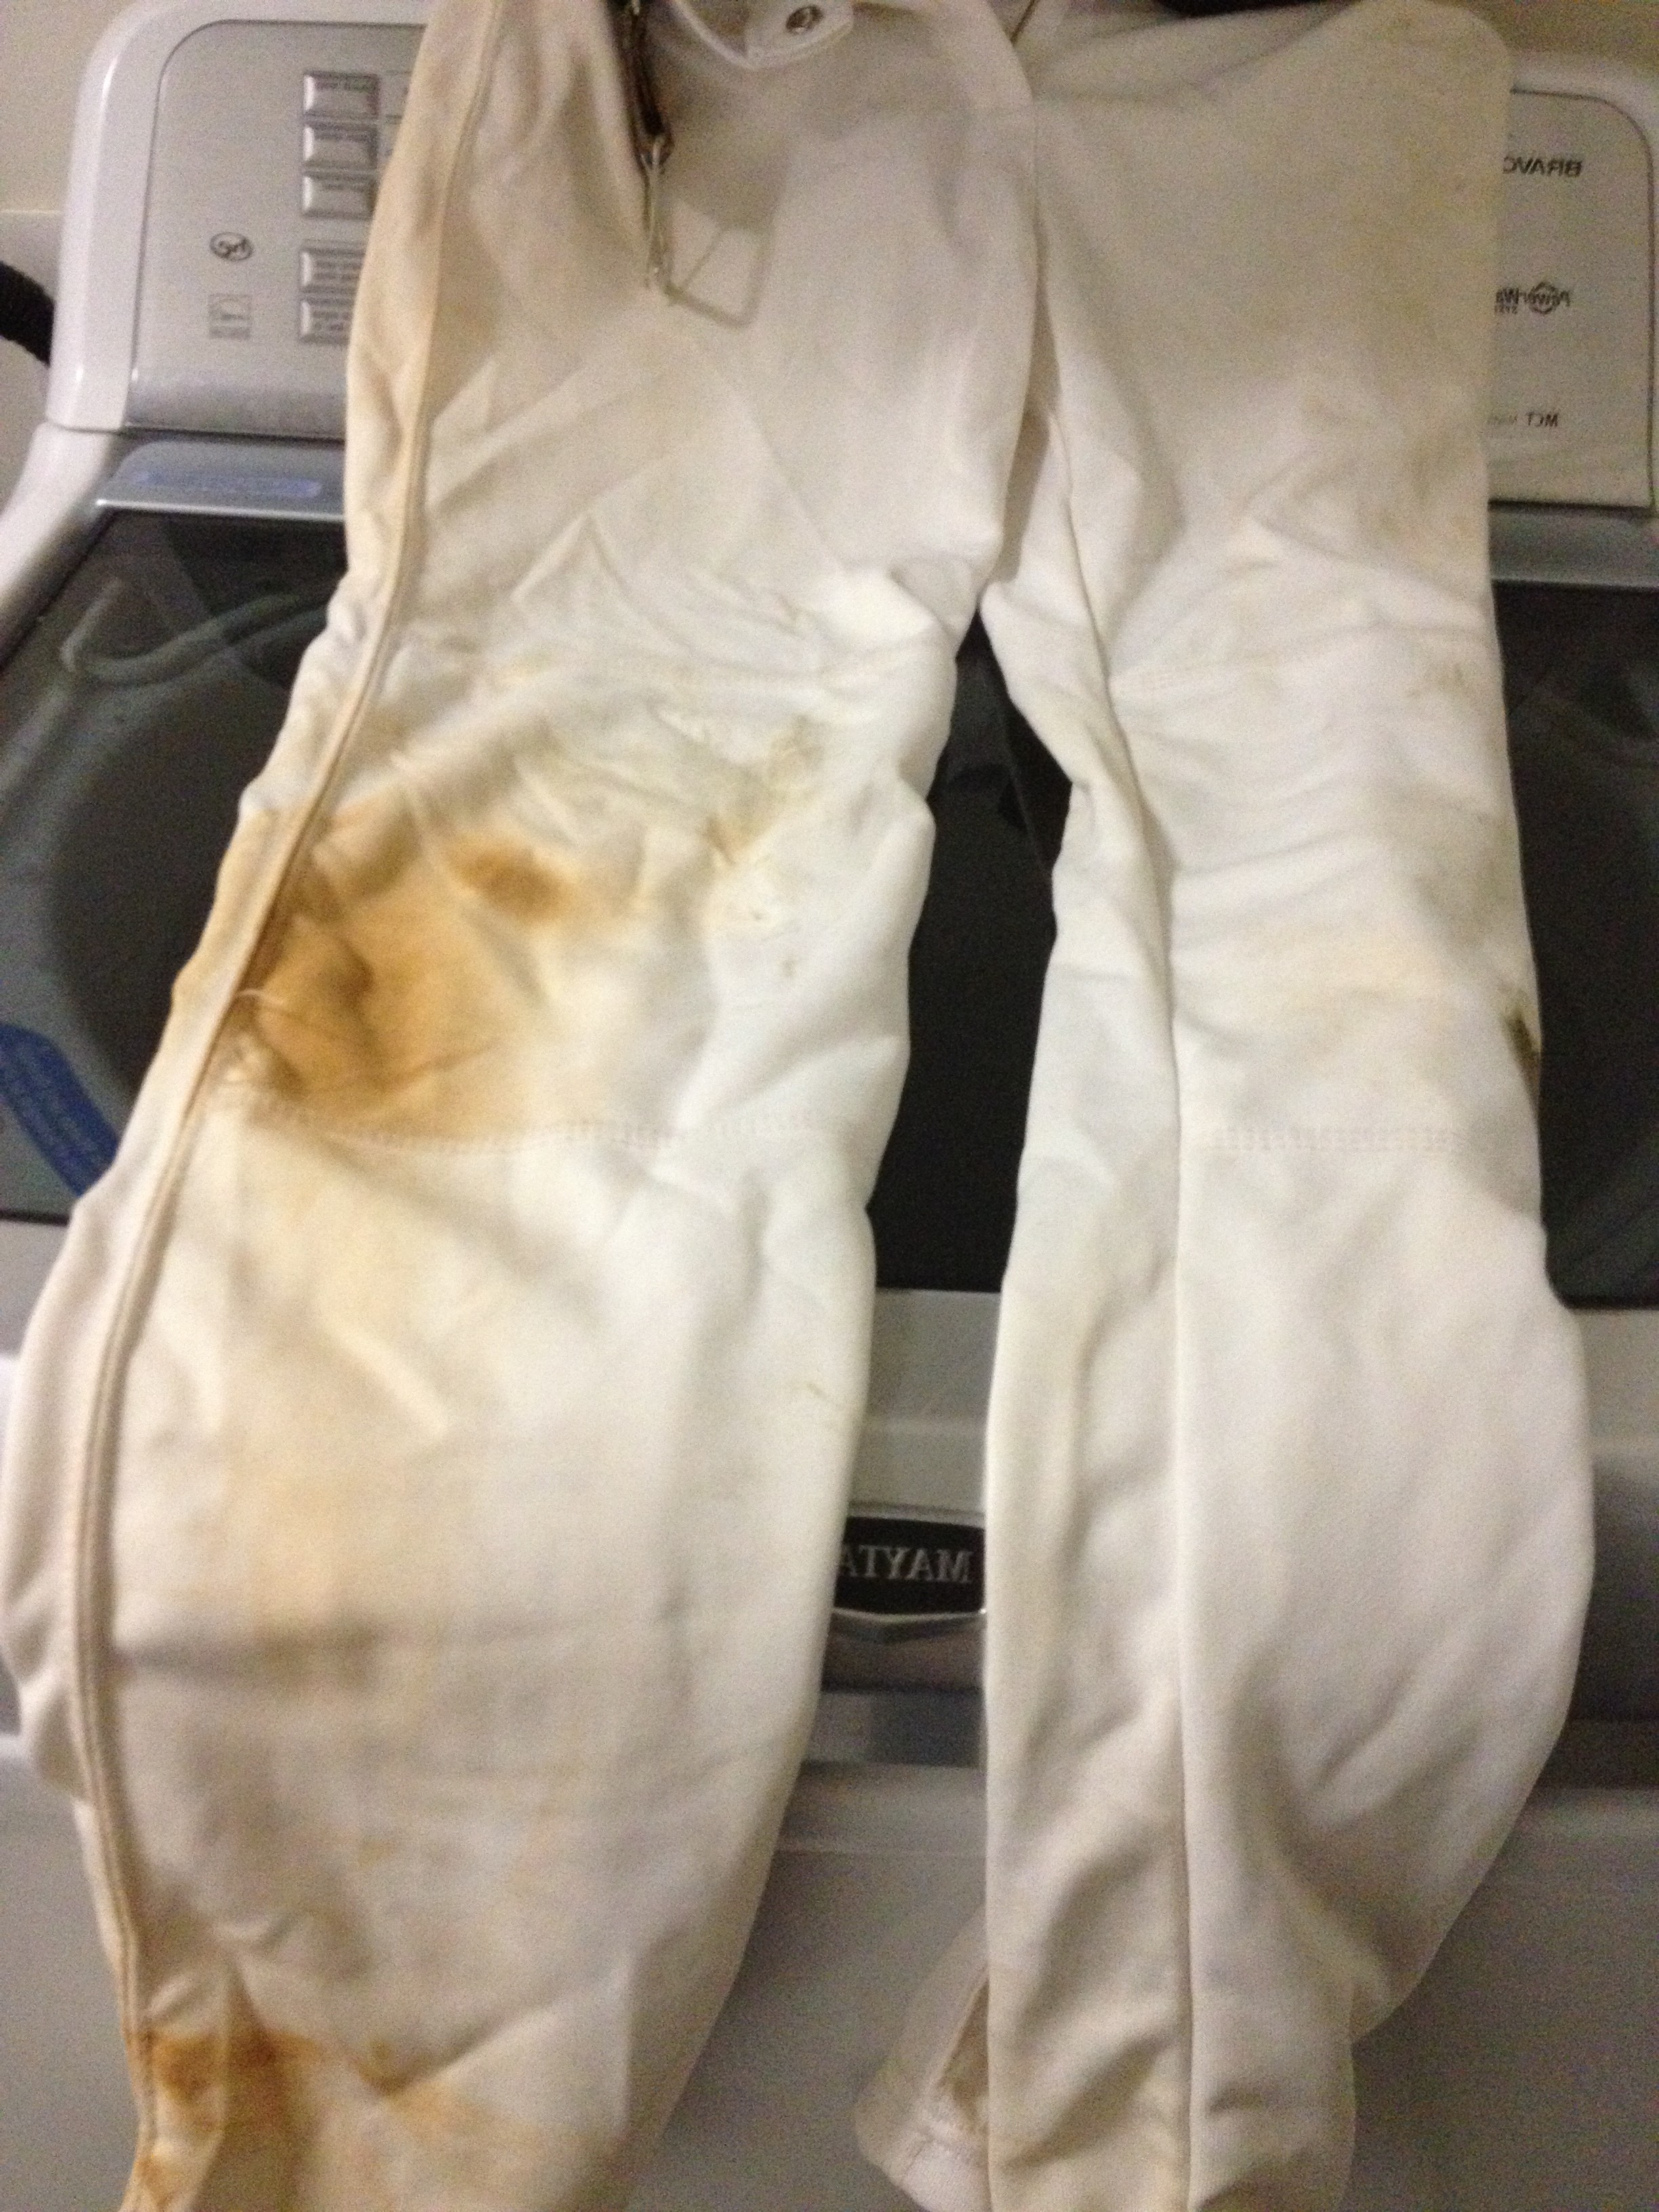 How To Clean Baseball Pants The Right Way – WIN Detergent